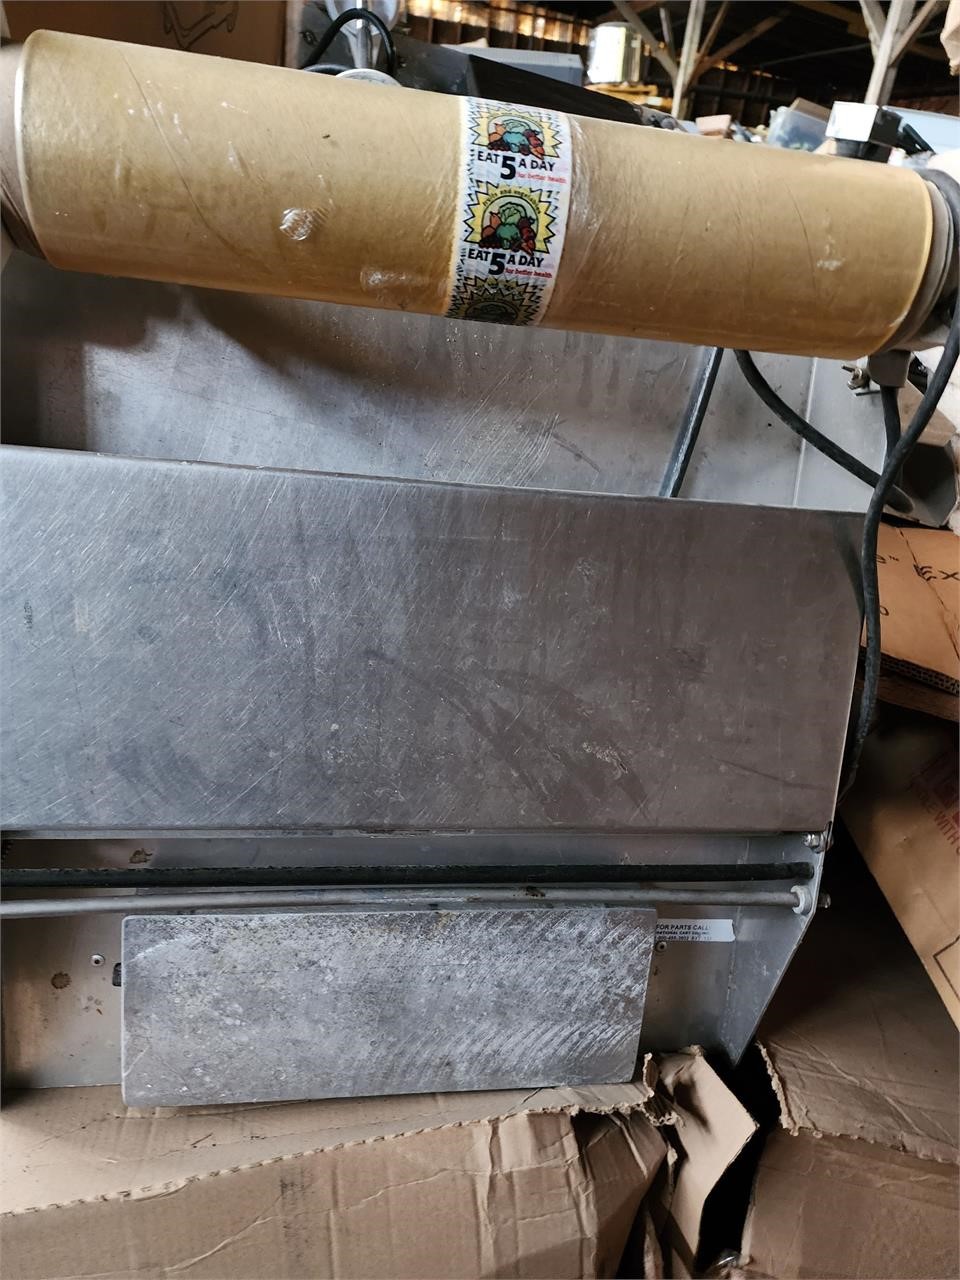 HEAT SEAL WRAPPING SATION